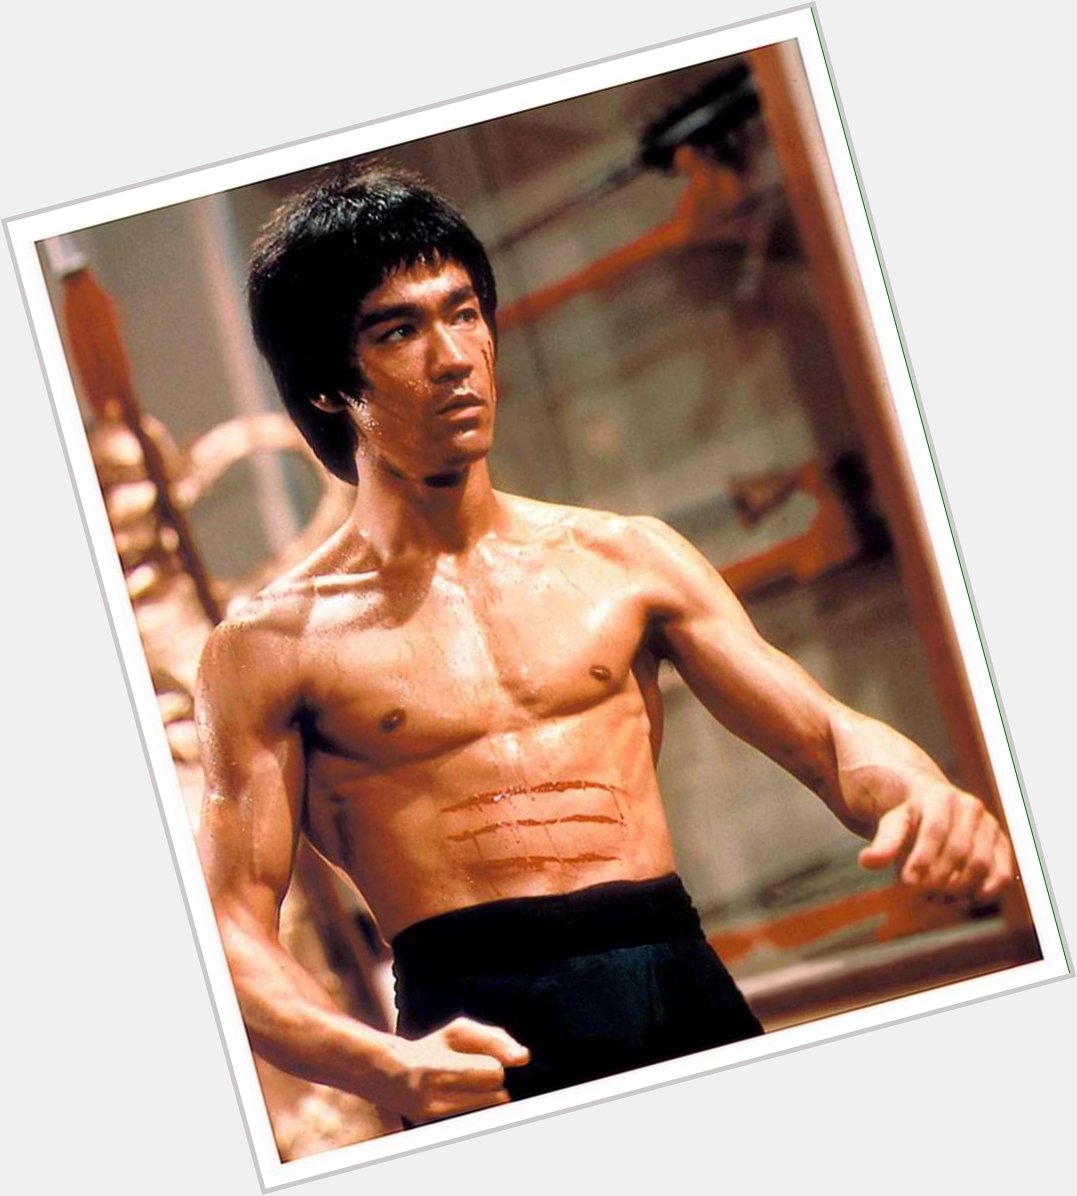 Happy birthday to the godfather of MMA and the founder of JKD, the legendary Bruce Lee. He would\ve been 75 today!  